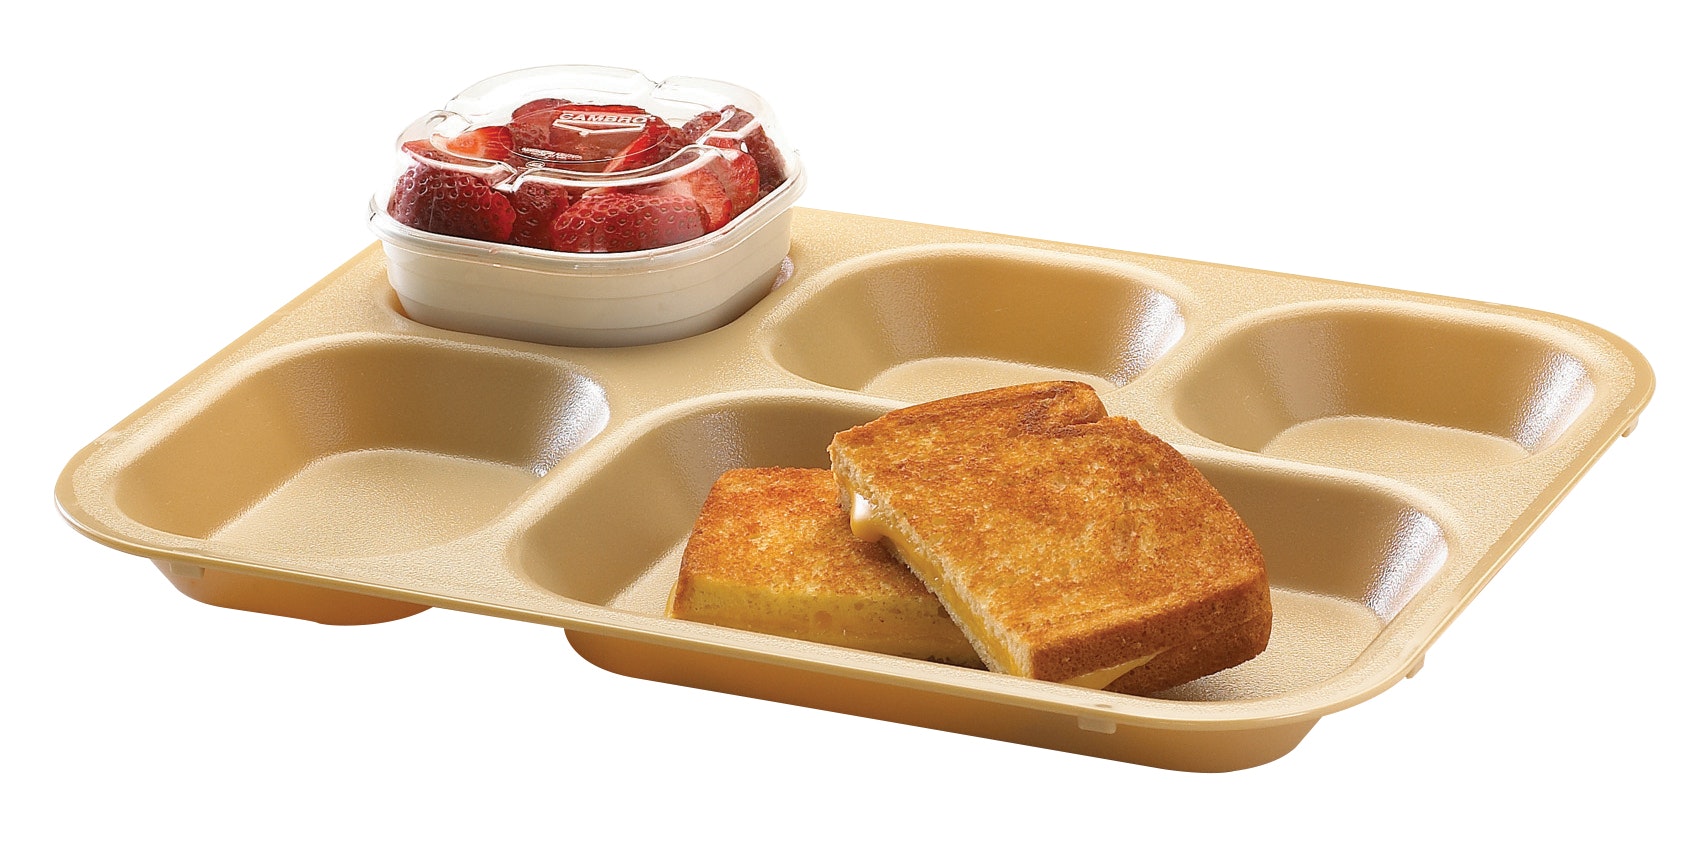 Correctional Food Service and Kitchen: Food Tray - 3 Compartment Meal Tray  - Charm-Tex